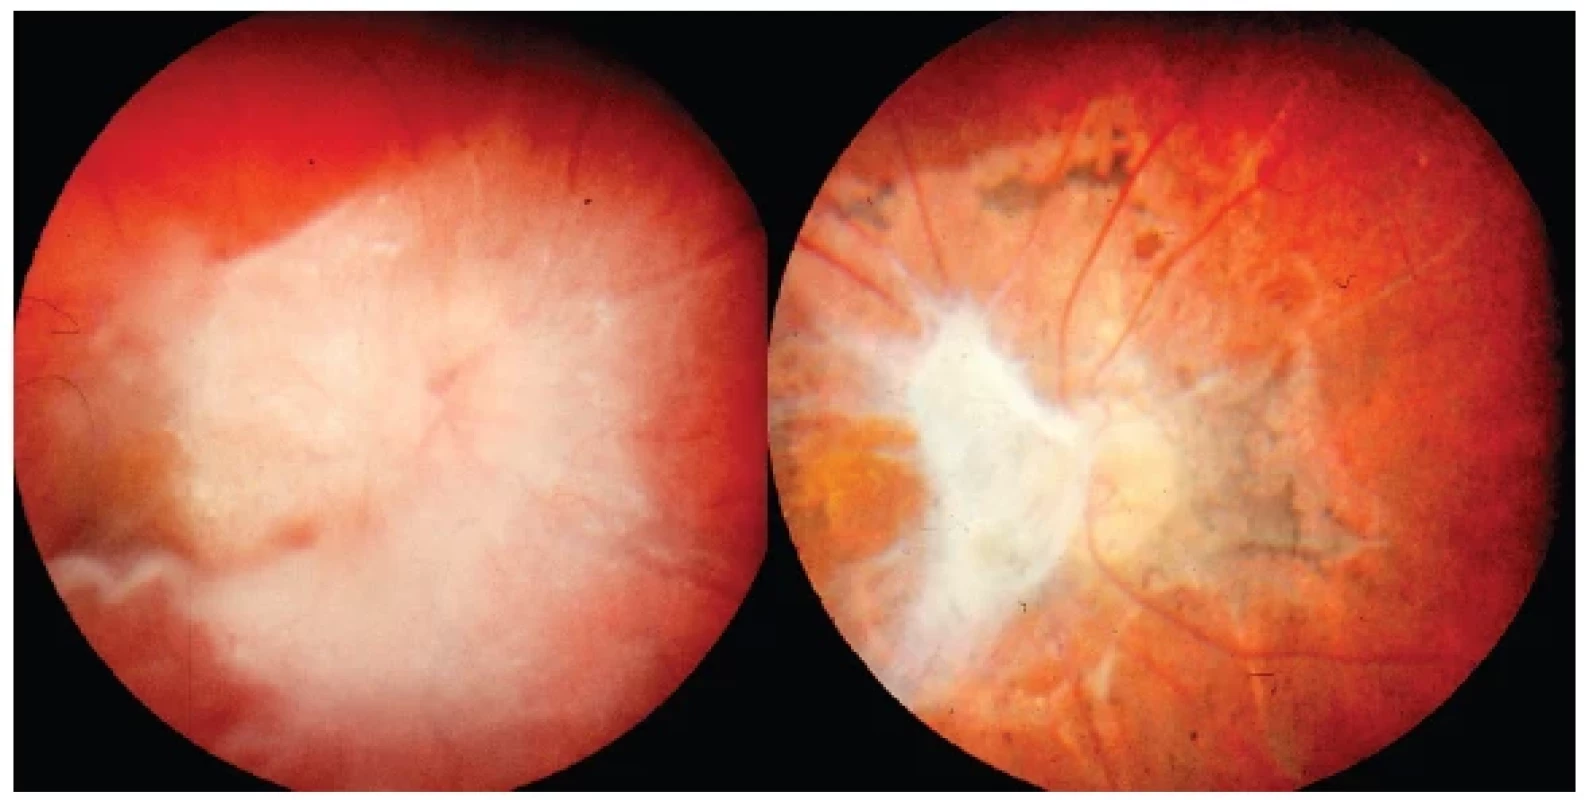 Left: Image of toxocara neuropathy with vitreoretinal reaction in the vicinity before general therapy
Right: Significant cicatricial retinal changes with optic nerve papillary atrophy and residues of vitreous membrane one year after combination treatment
